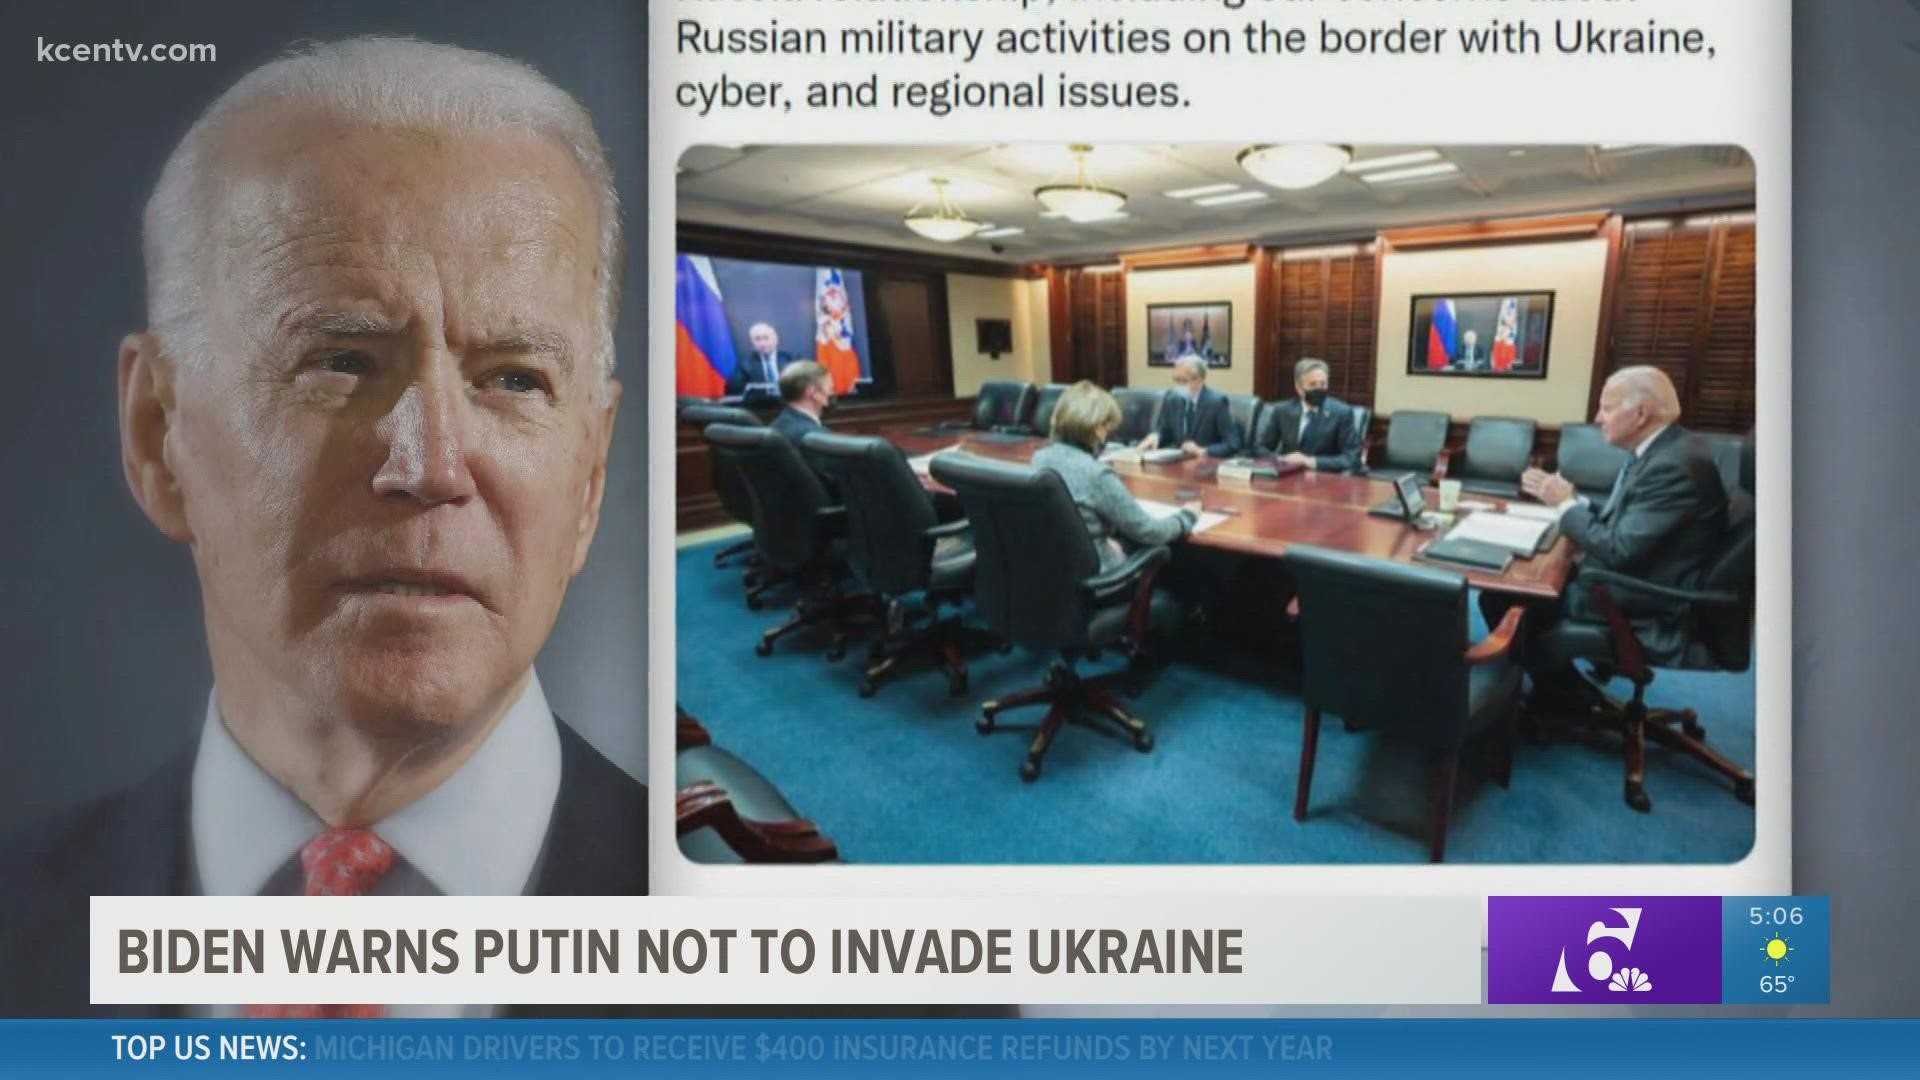 Biden told Russian President Vladimir Putin on Tuesday that the United States is prepared to launch strong economic measures should Russia invade Ukraine.